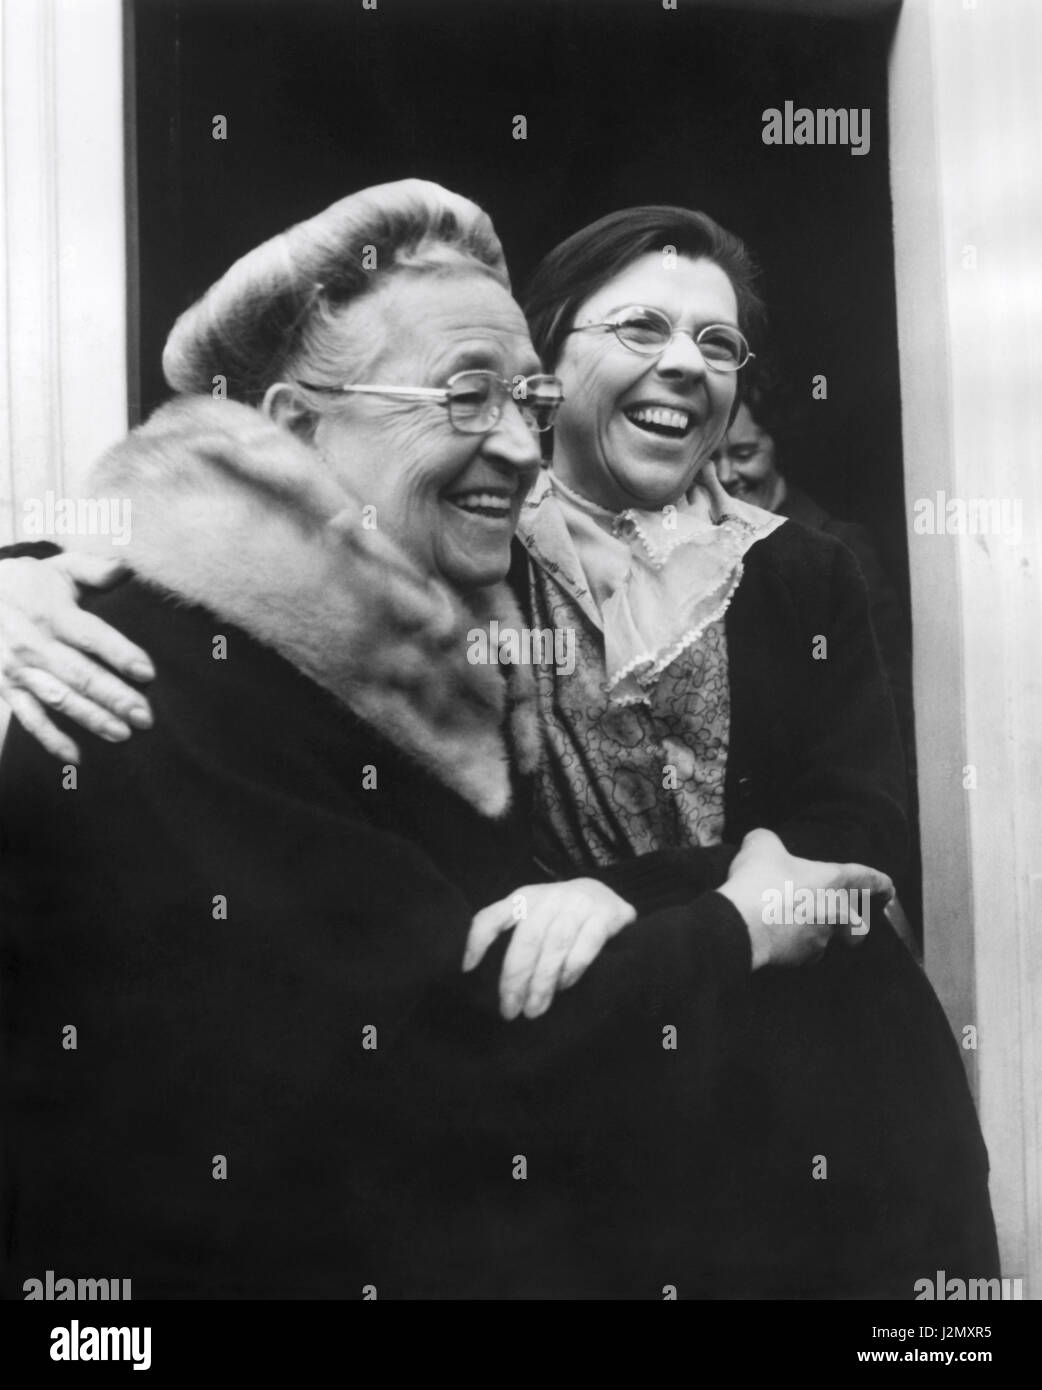 Corrie ten Boom, a Christian who helped many Jews escape the holocaust and who was herself a survivor of Nazi concentration camps, is show with actress Jeannette Clift who played the part of Corrie in the 1975 film, 'The Hiding Place.' Stock Photo